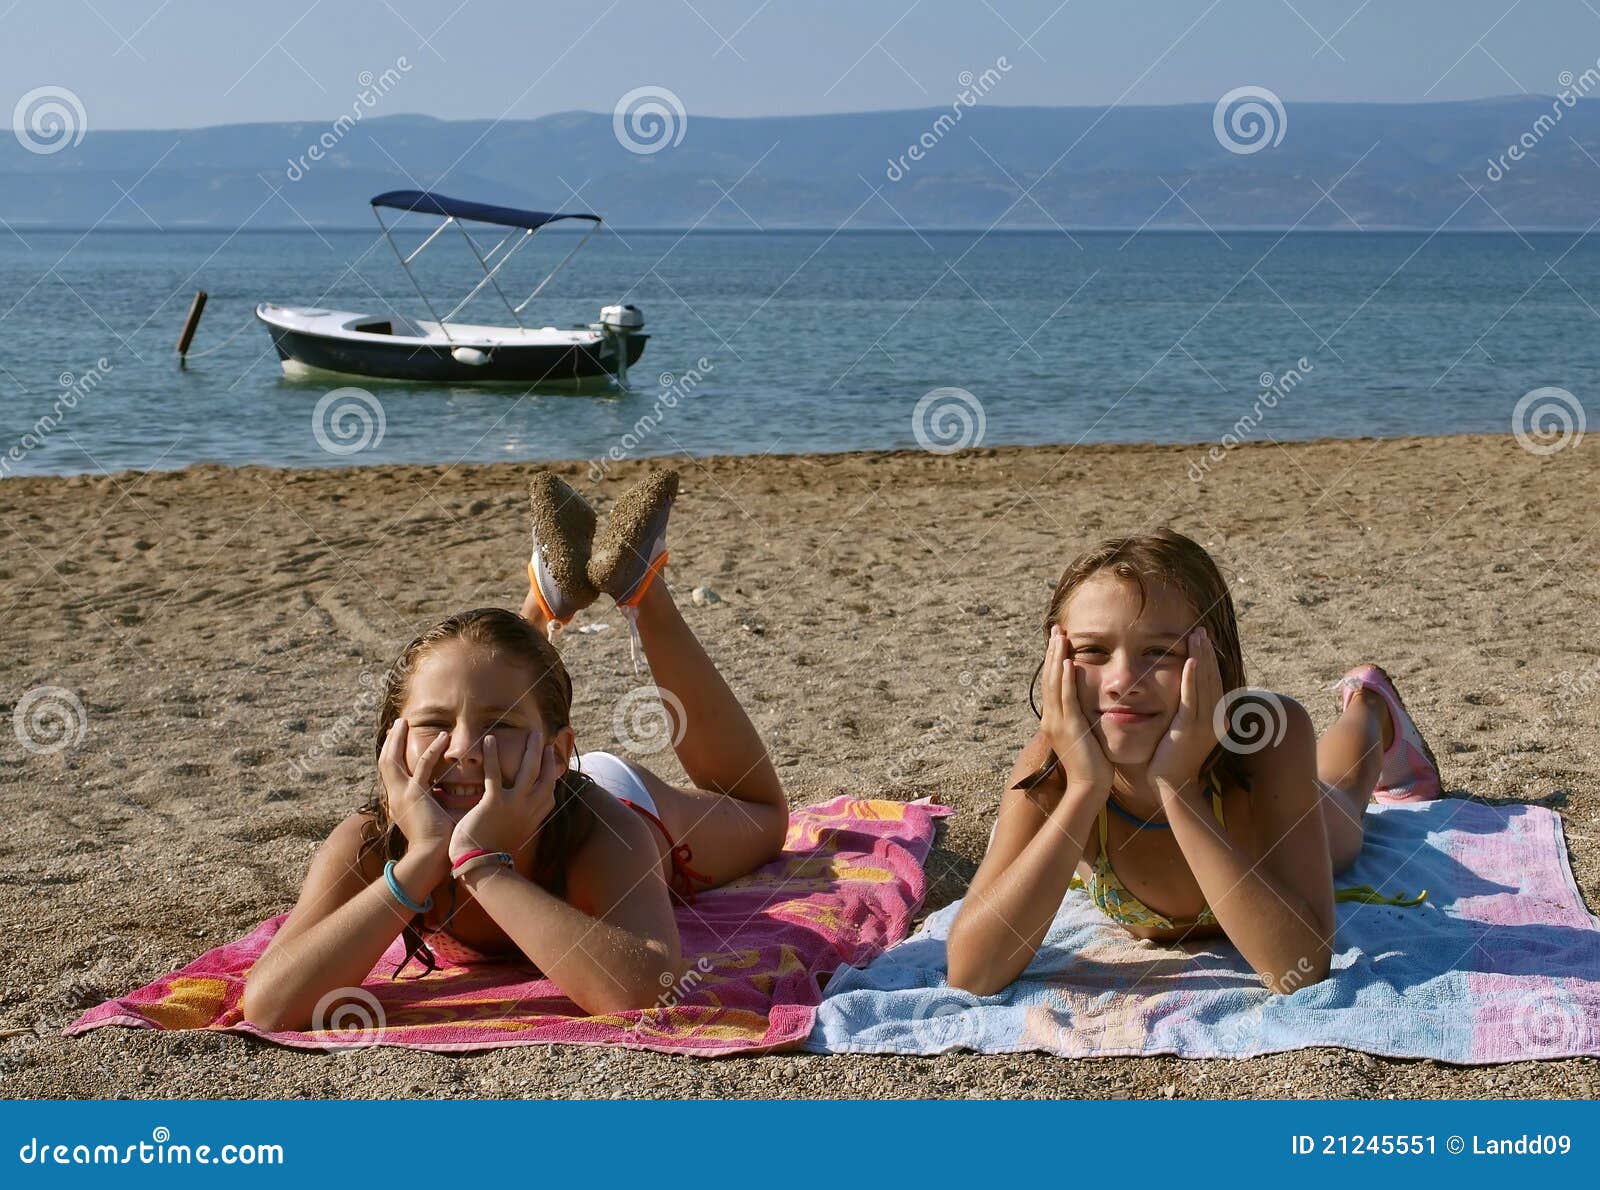 956 Peaceful Careless Stock Photos - Free & Royalty-Free Stock Photos from  Dreamstime